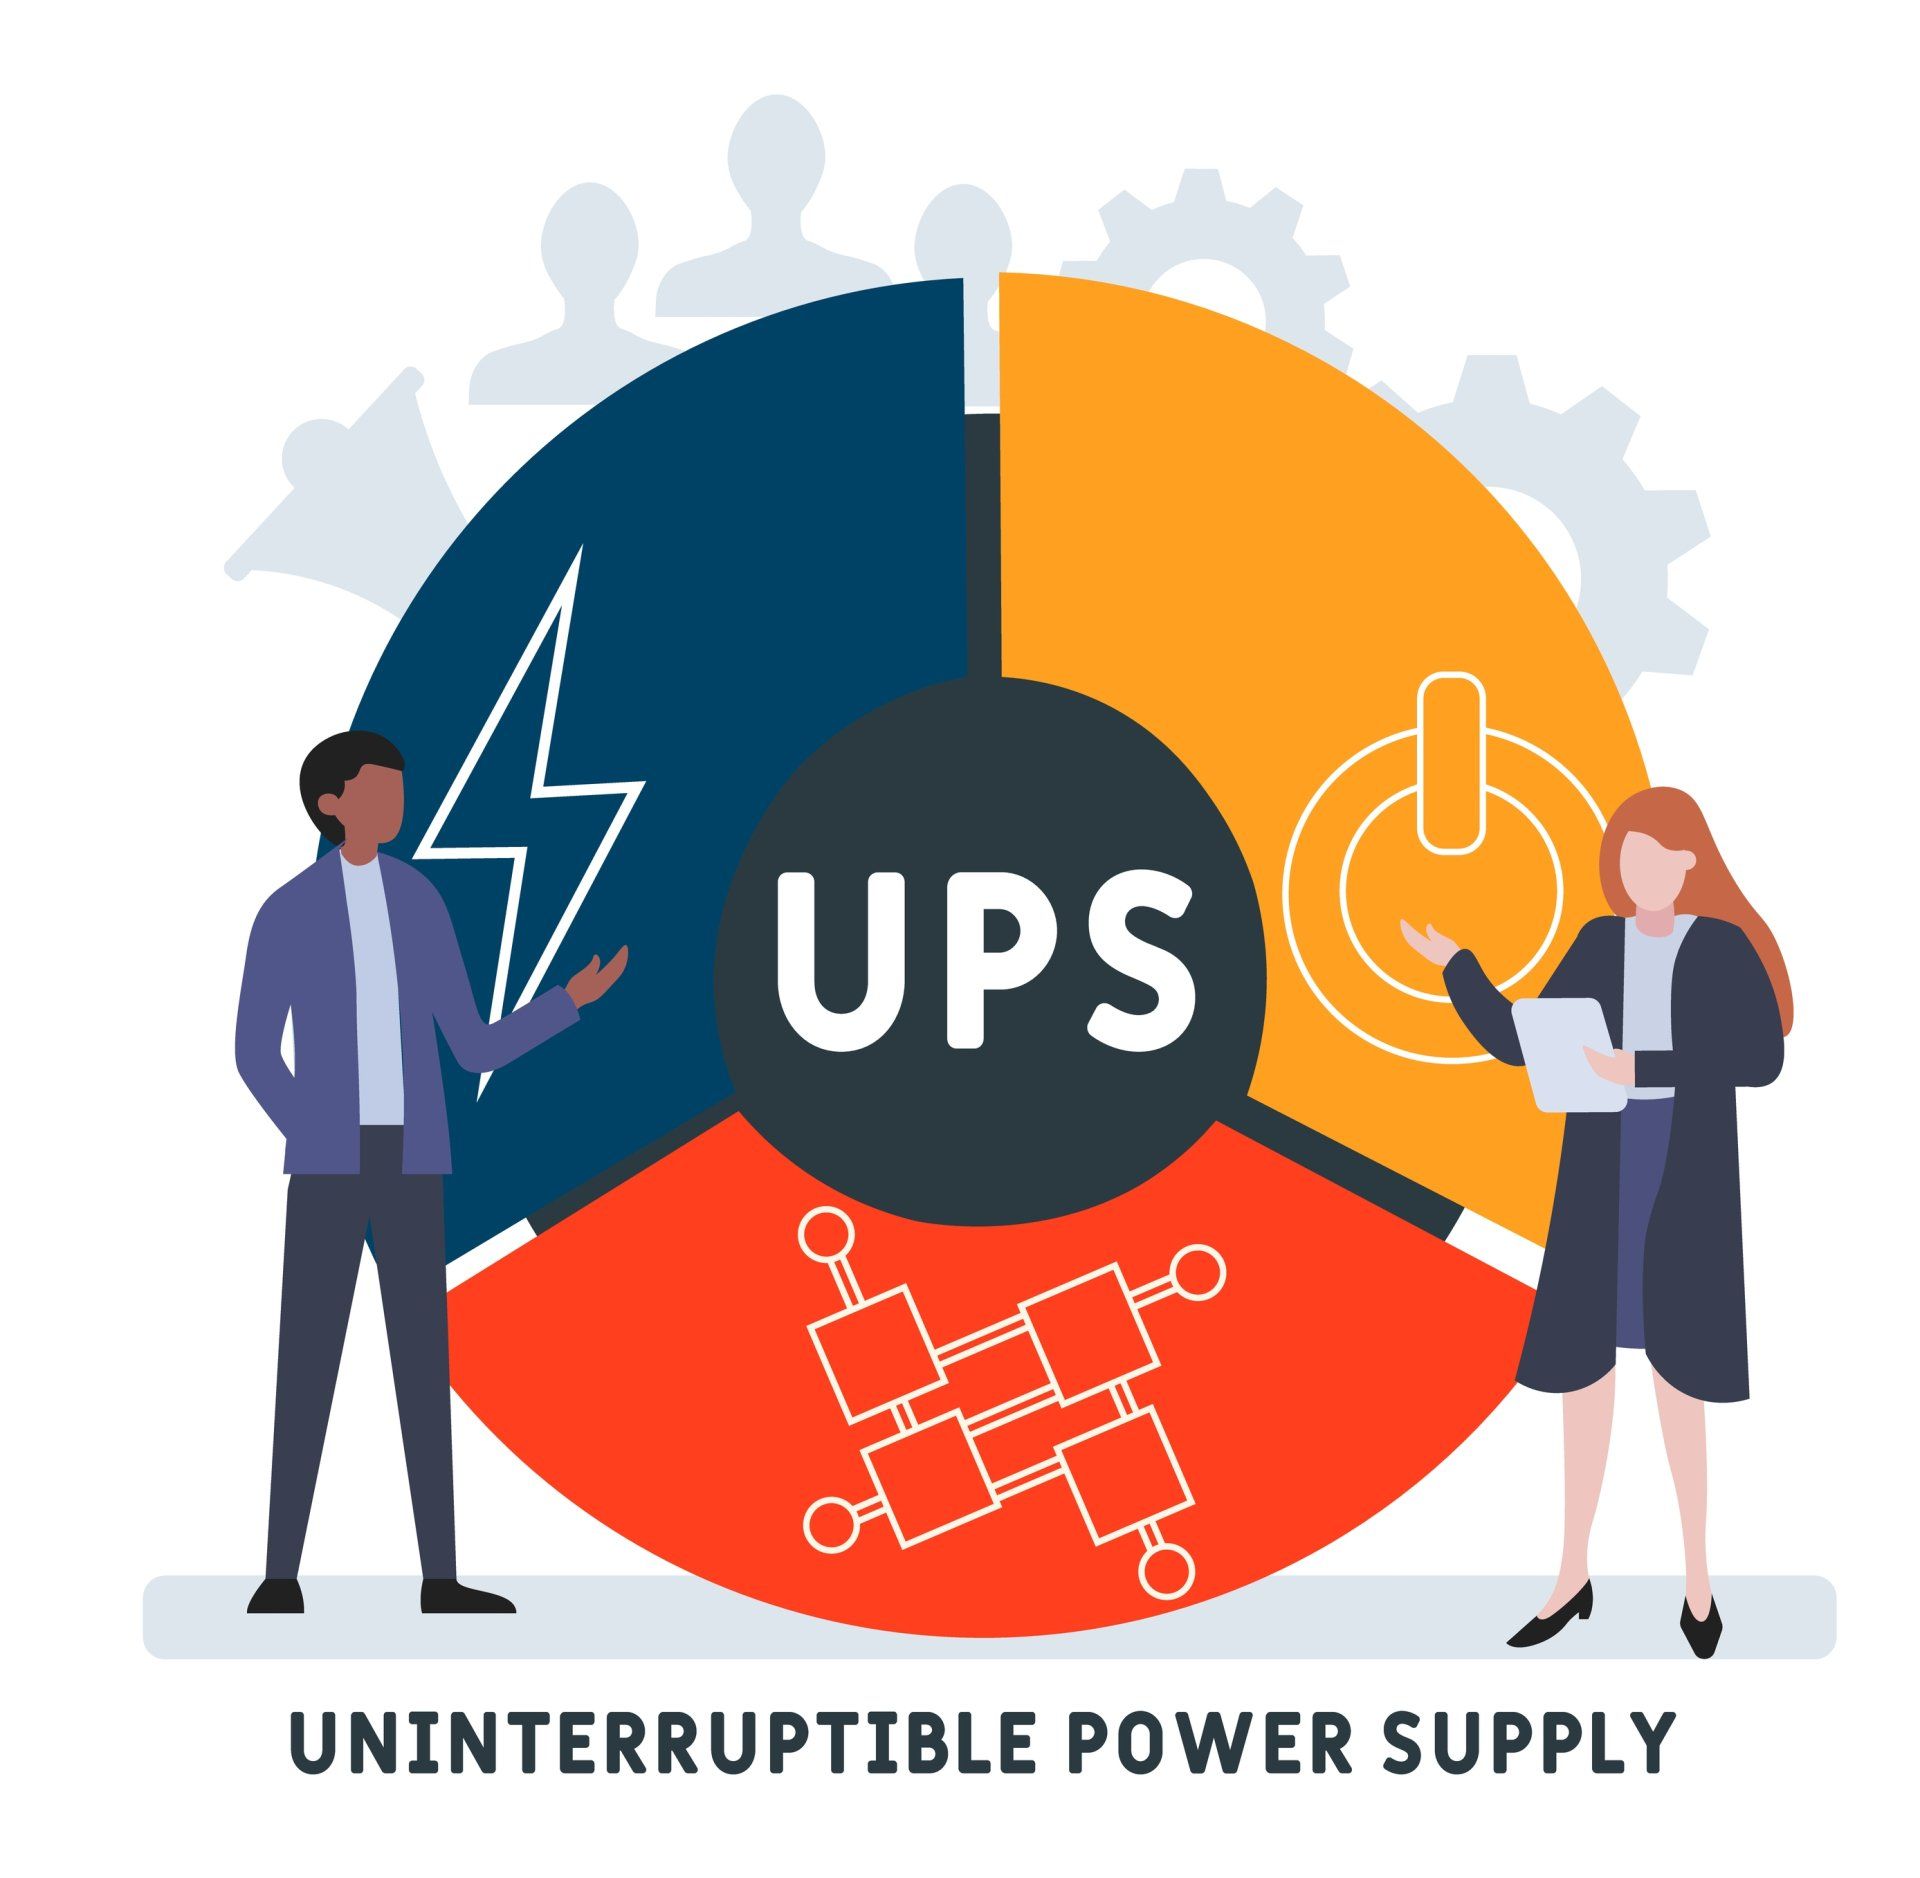 an illustration showing the types of ups energy storage